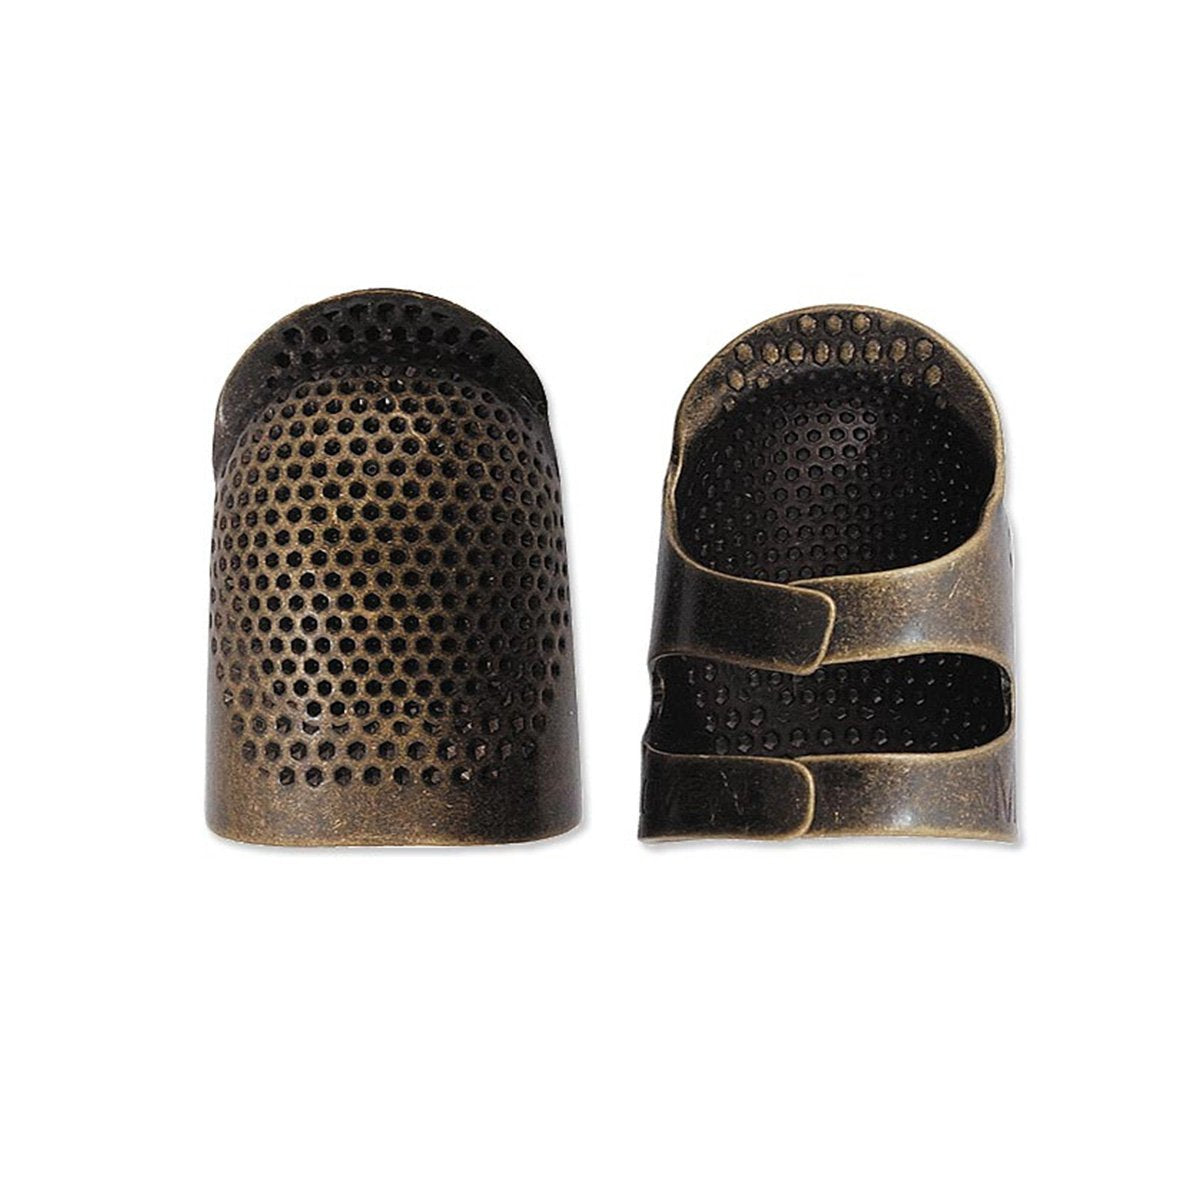 Little House Japanese Silicone Rubber Grip Thimble Small, Medium